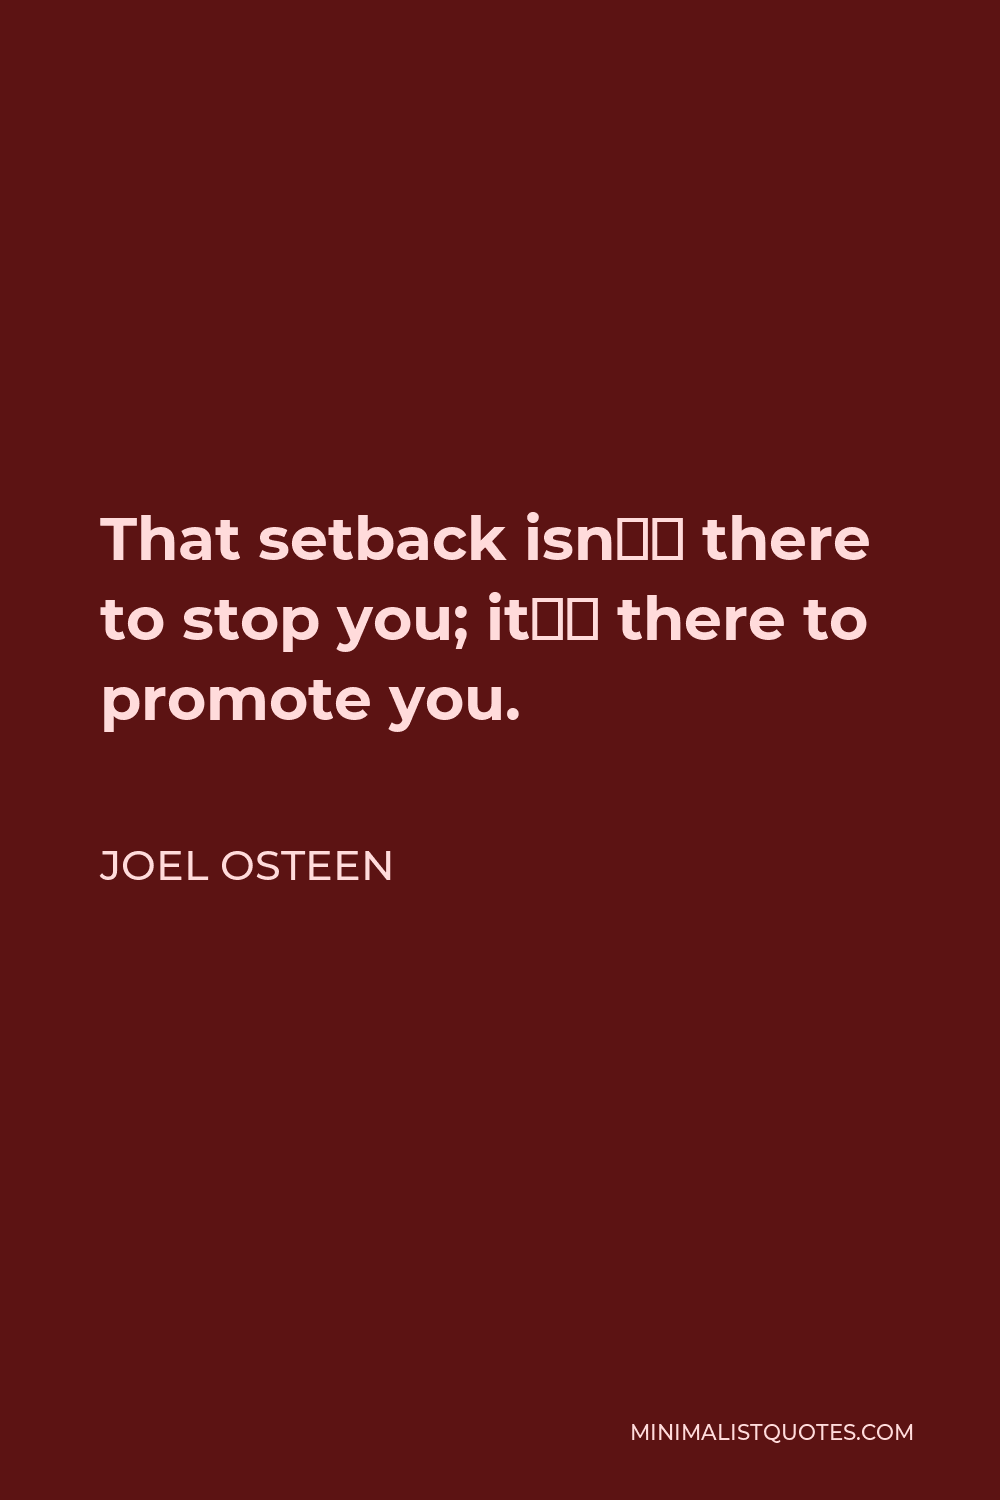 Joel Osteen Quote - That setback isn’t there to stop you; it’s there to promote you.